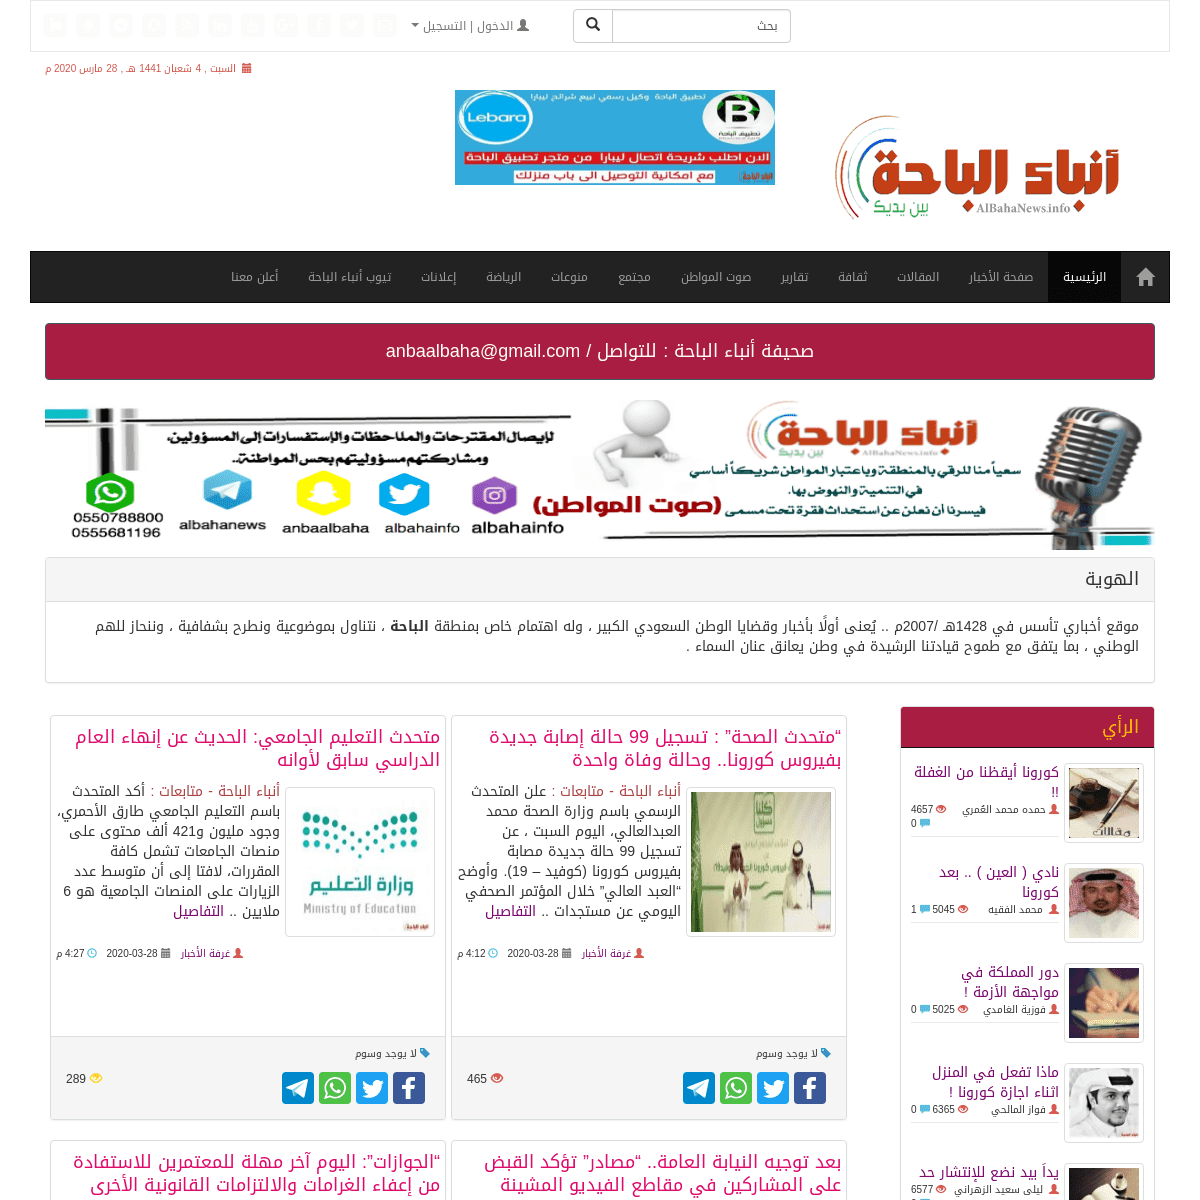 A complete backup of albahanews.info